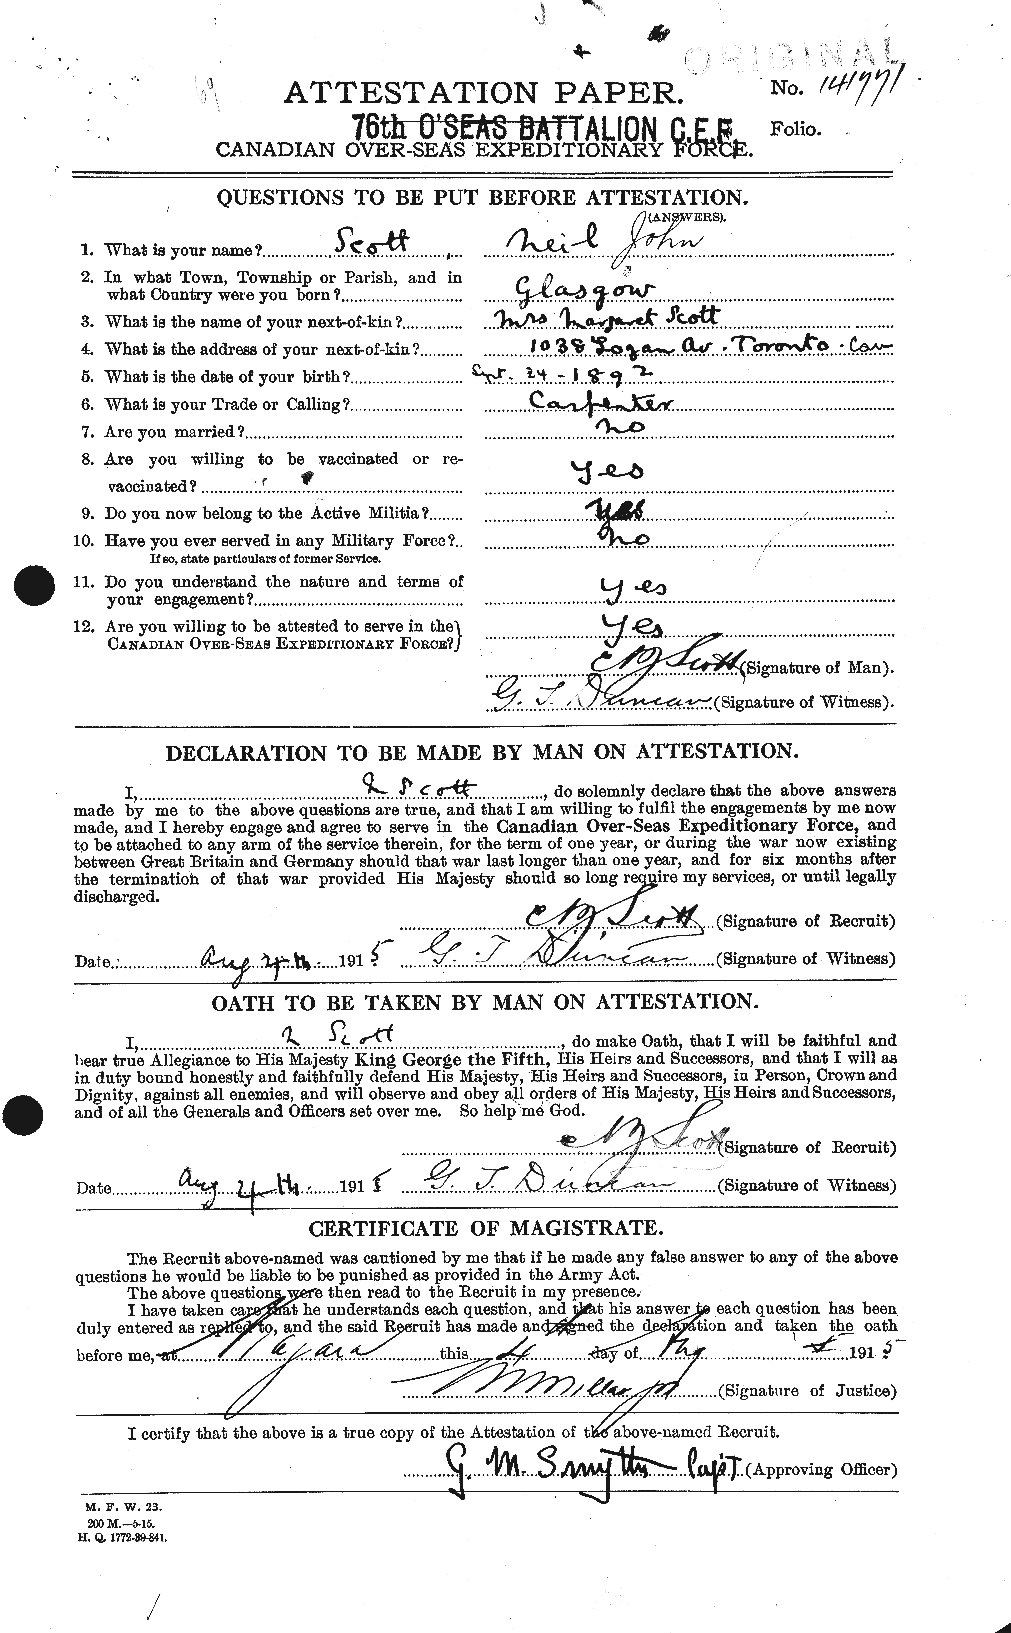 Personnel Records of the First World War - CEF 083213a